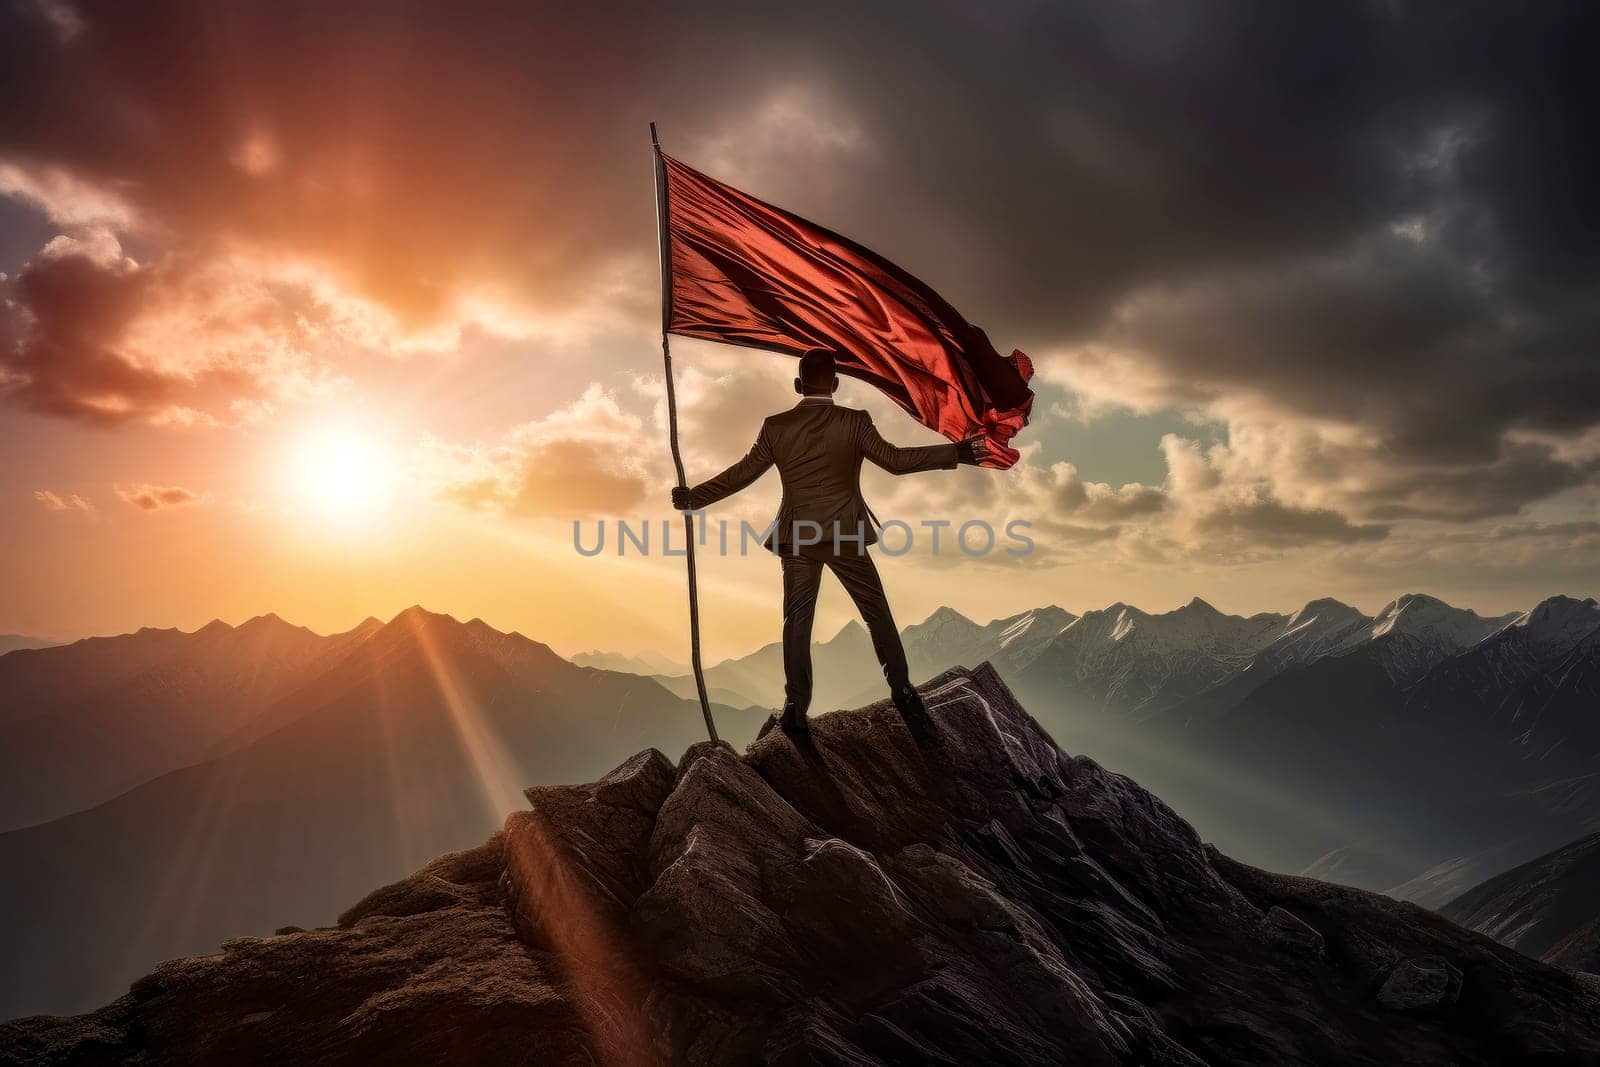 An inspiring image of a man standing atop a mountain peak, proudly holding a flag as a symbol of accomplishment.